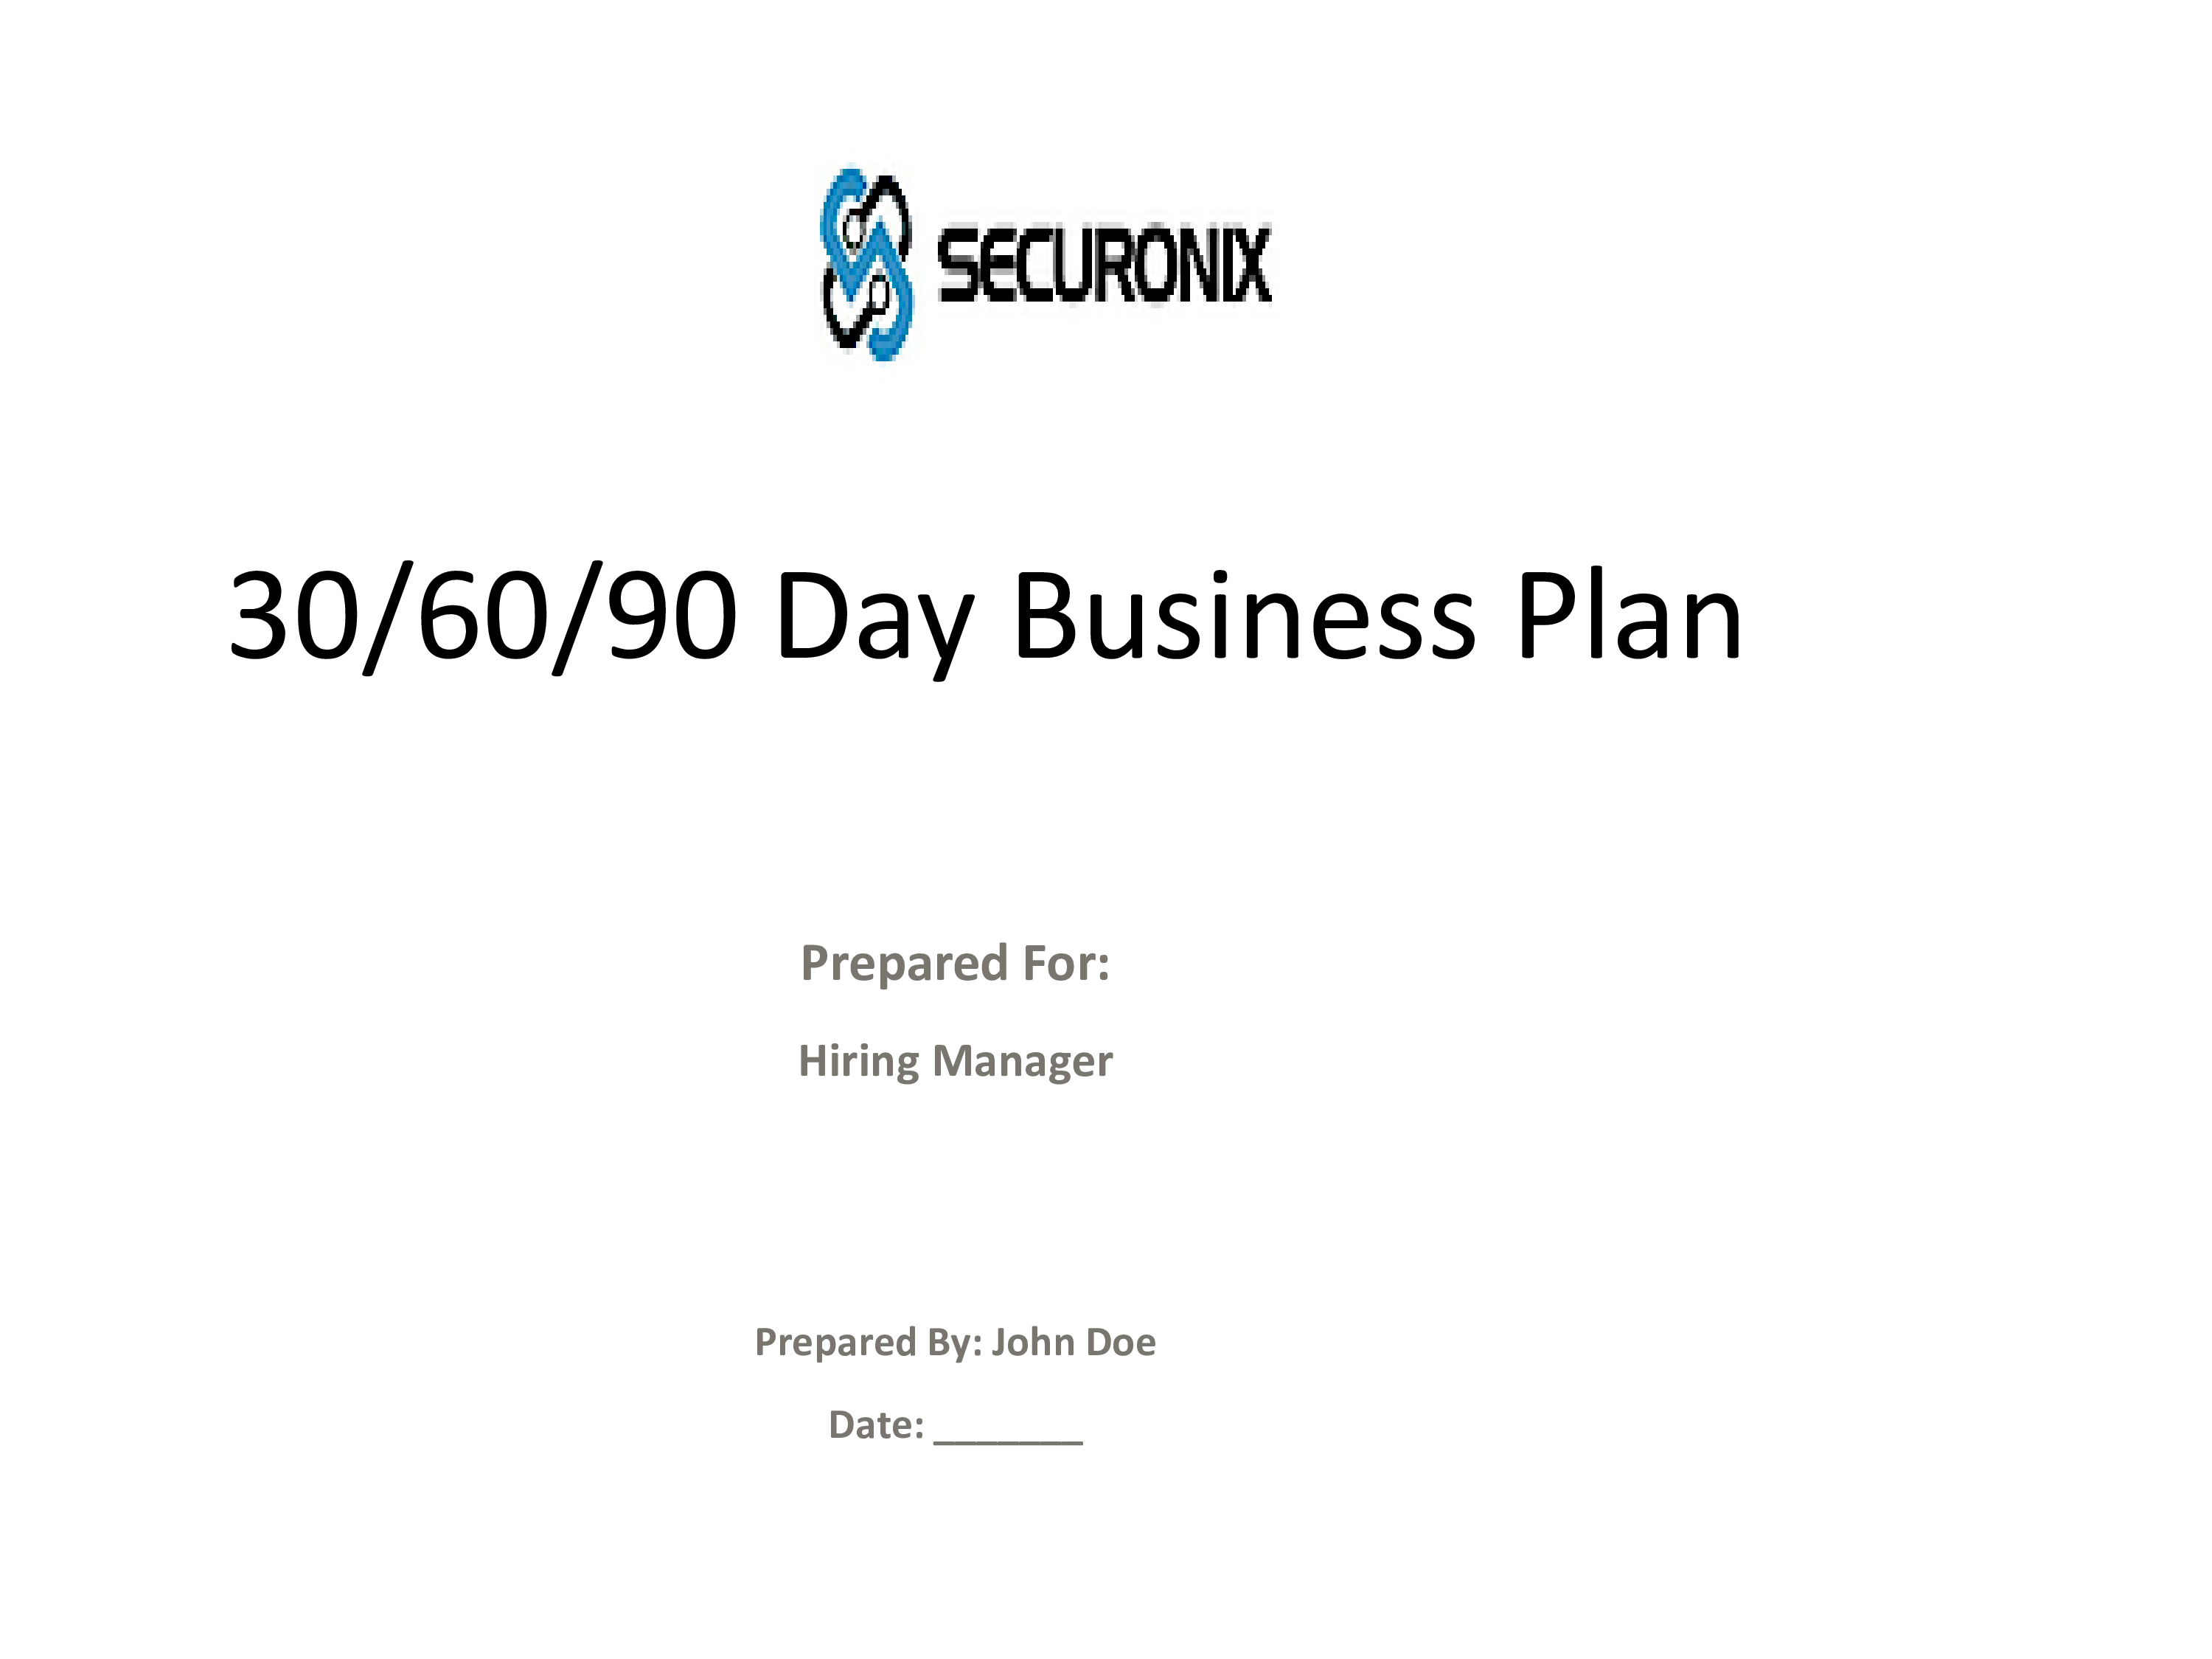 90 Day Business Plan main image